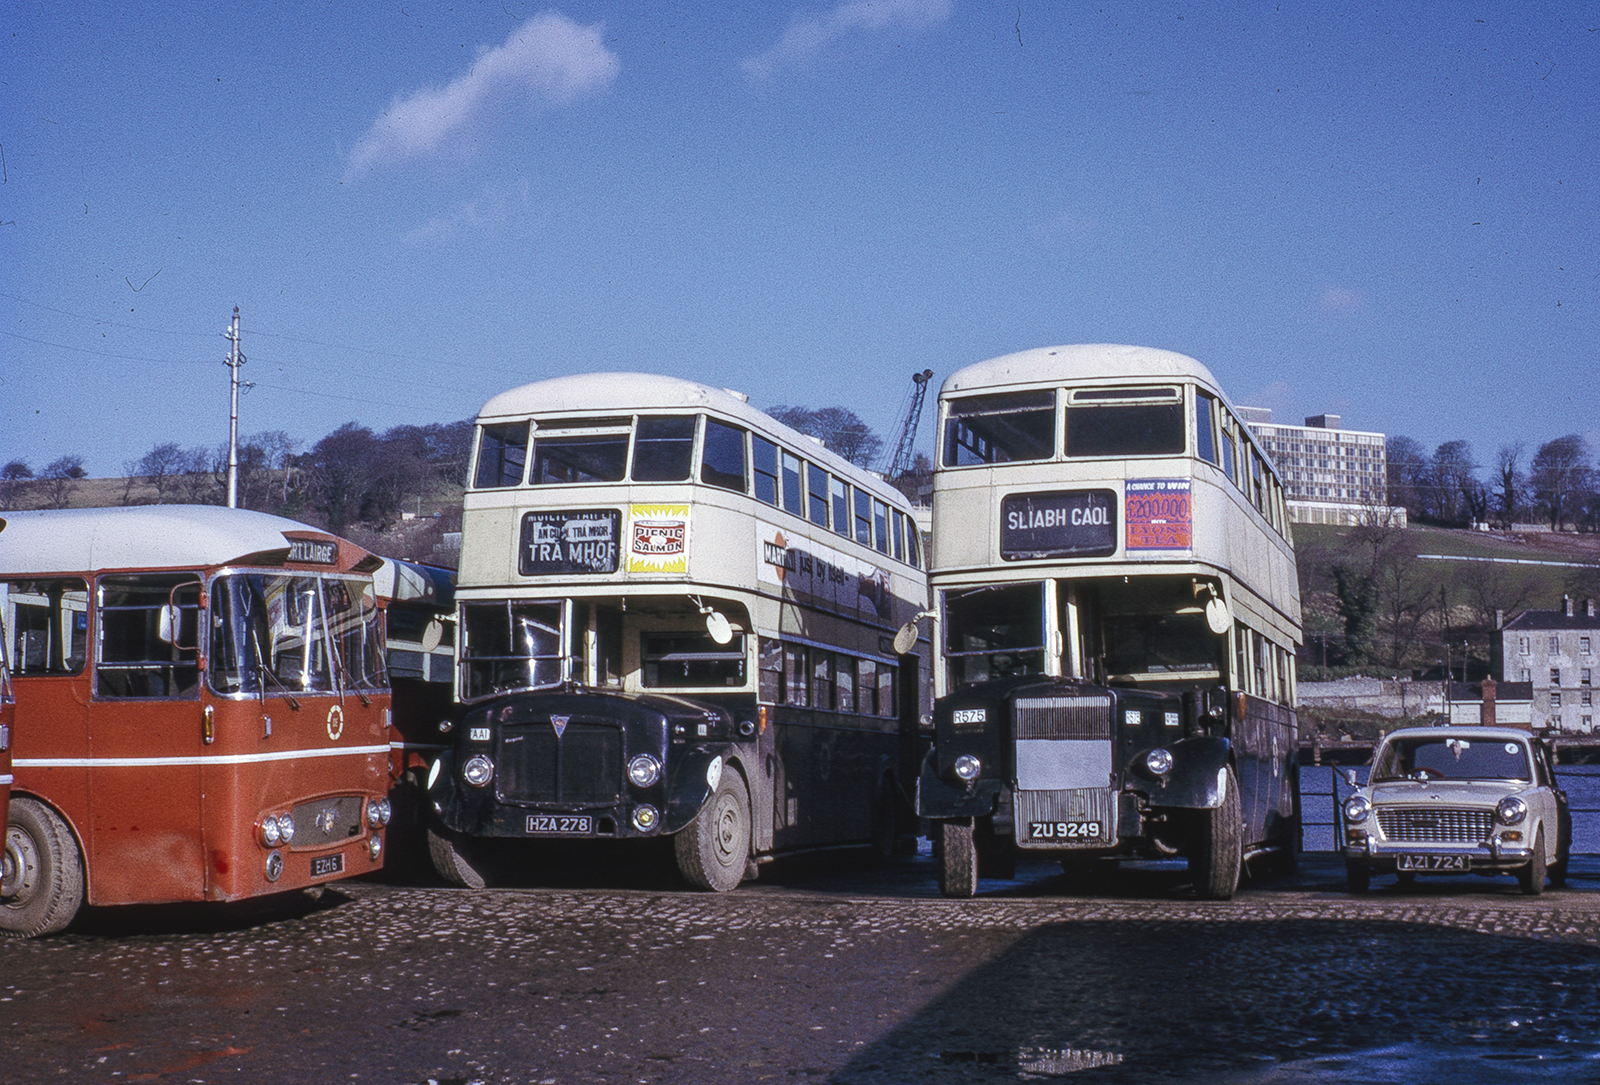 1971 CIÉ Waterford City buses